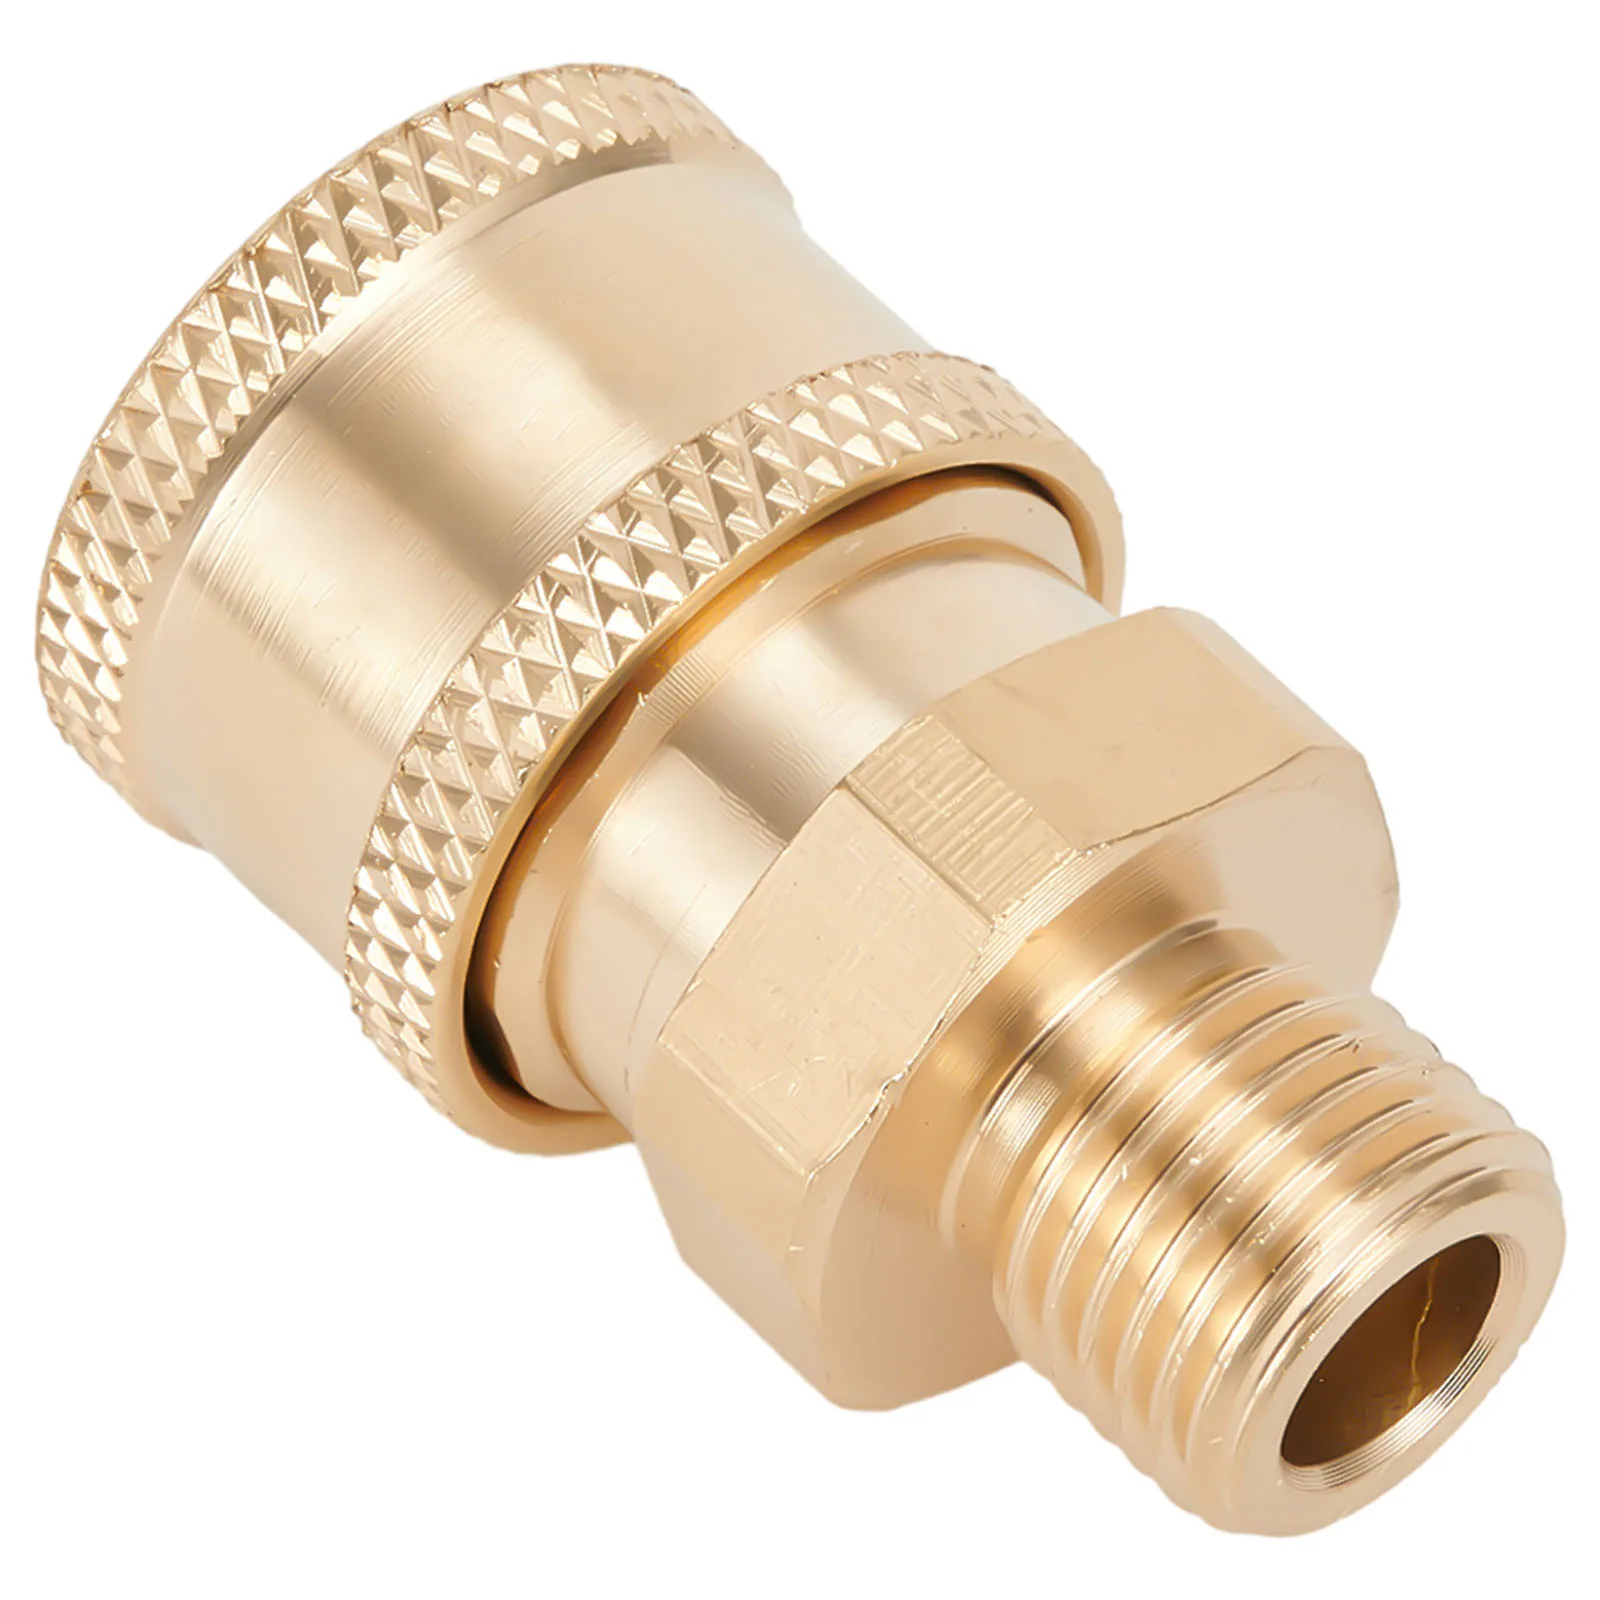 

Adapter Quick Connector Garden Copper Garden Joints Pressure Washer Coupling Quick Release Quickly Disassemble